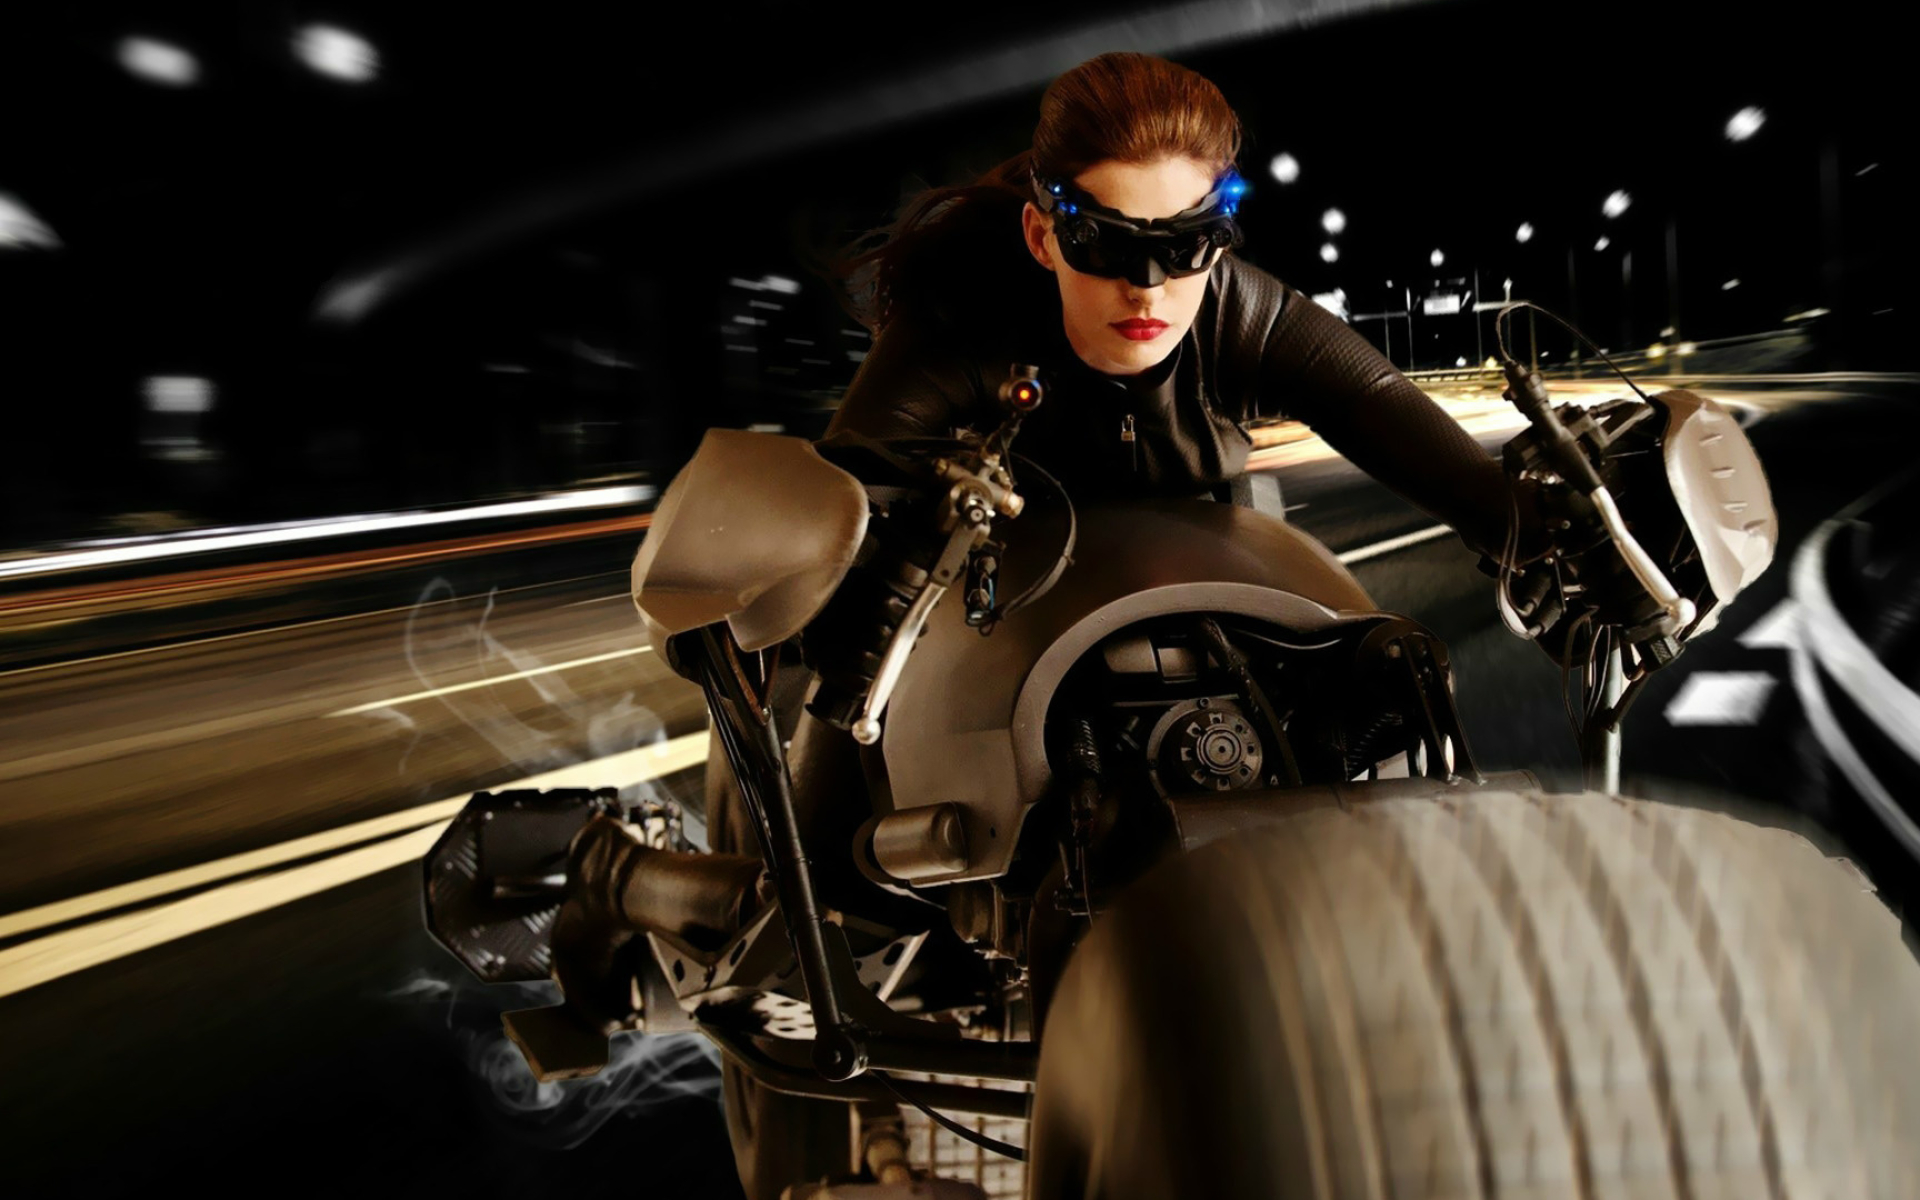 Catwoman (Movie), The Dark Knight Rises, Antagonist turned ally, Intriguing storyline, 1920x1200 HD Desktop